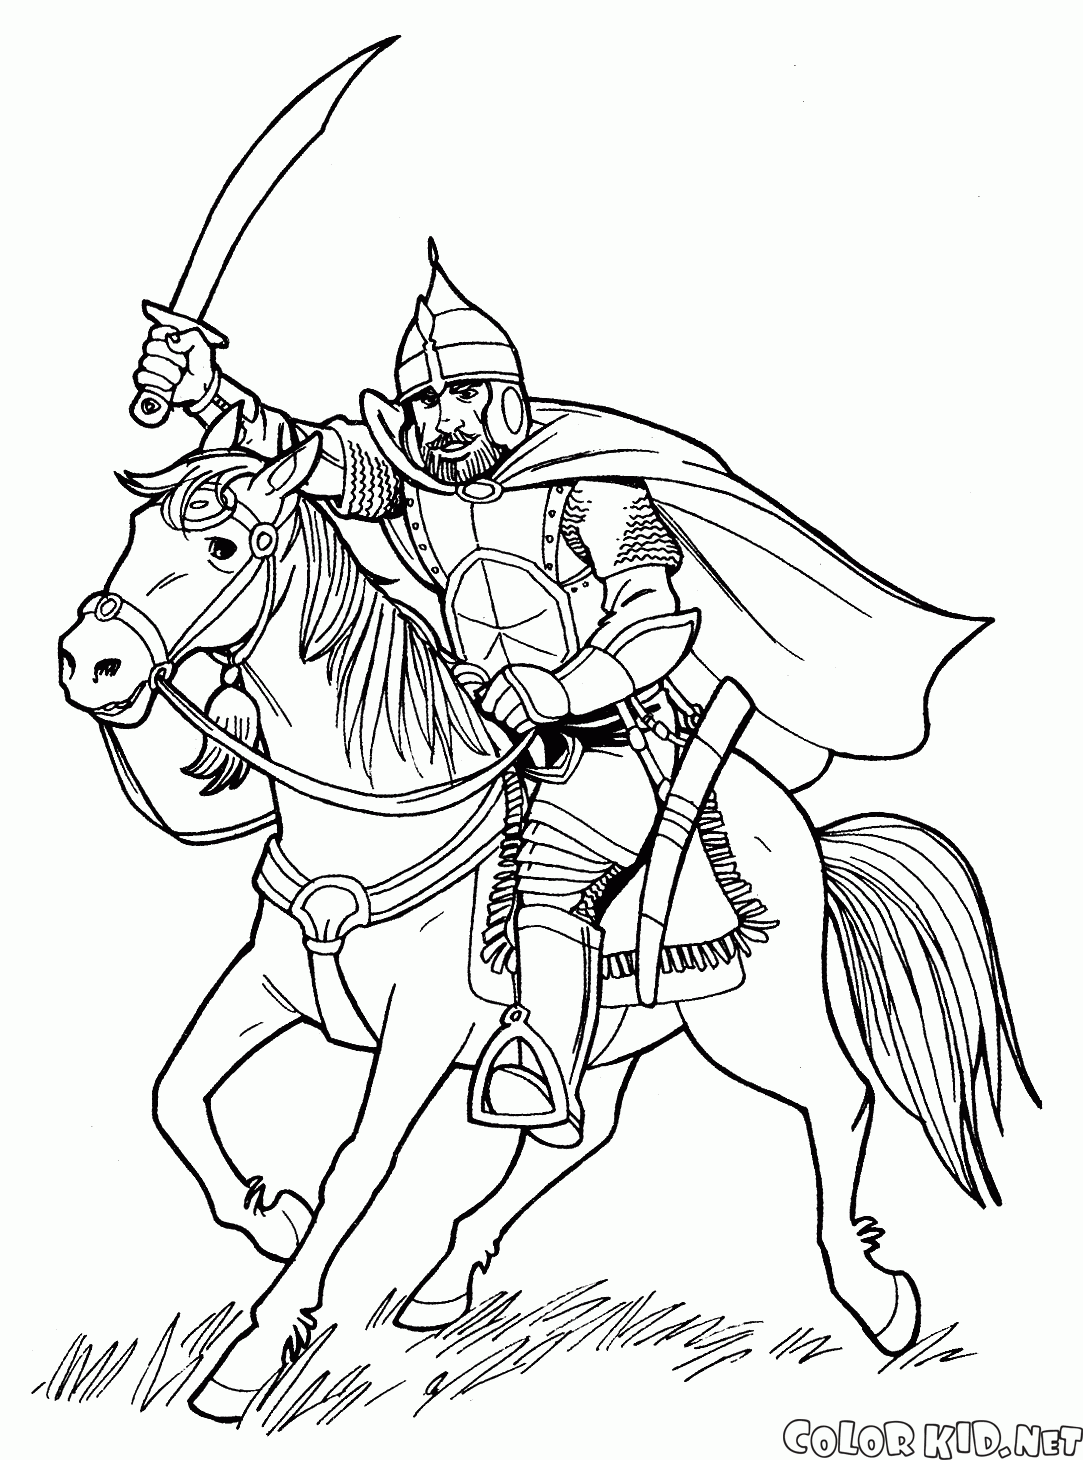 Coloring page - Wars, knights, and soldiers